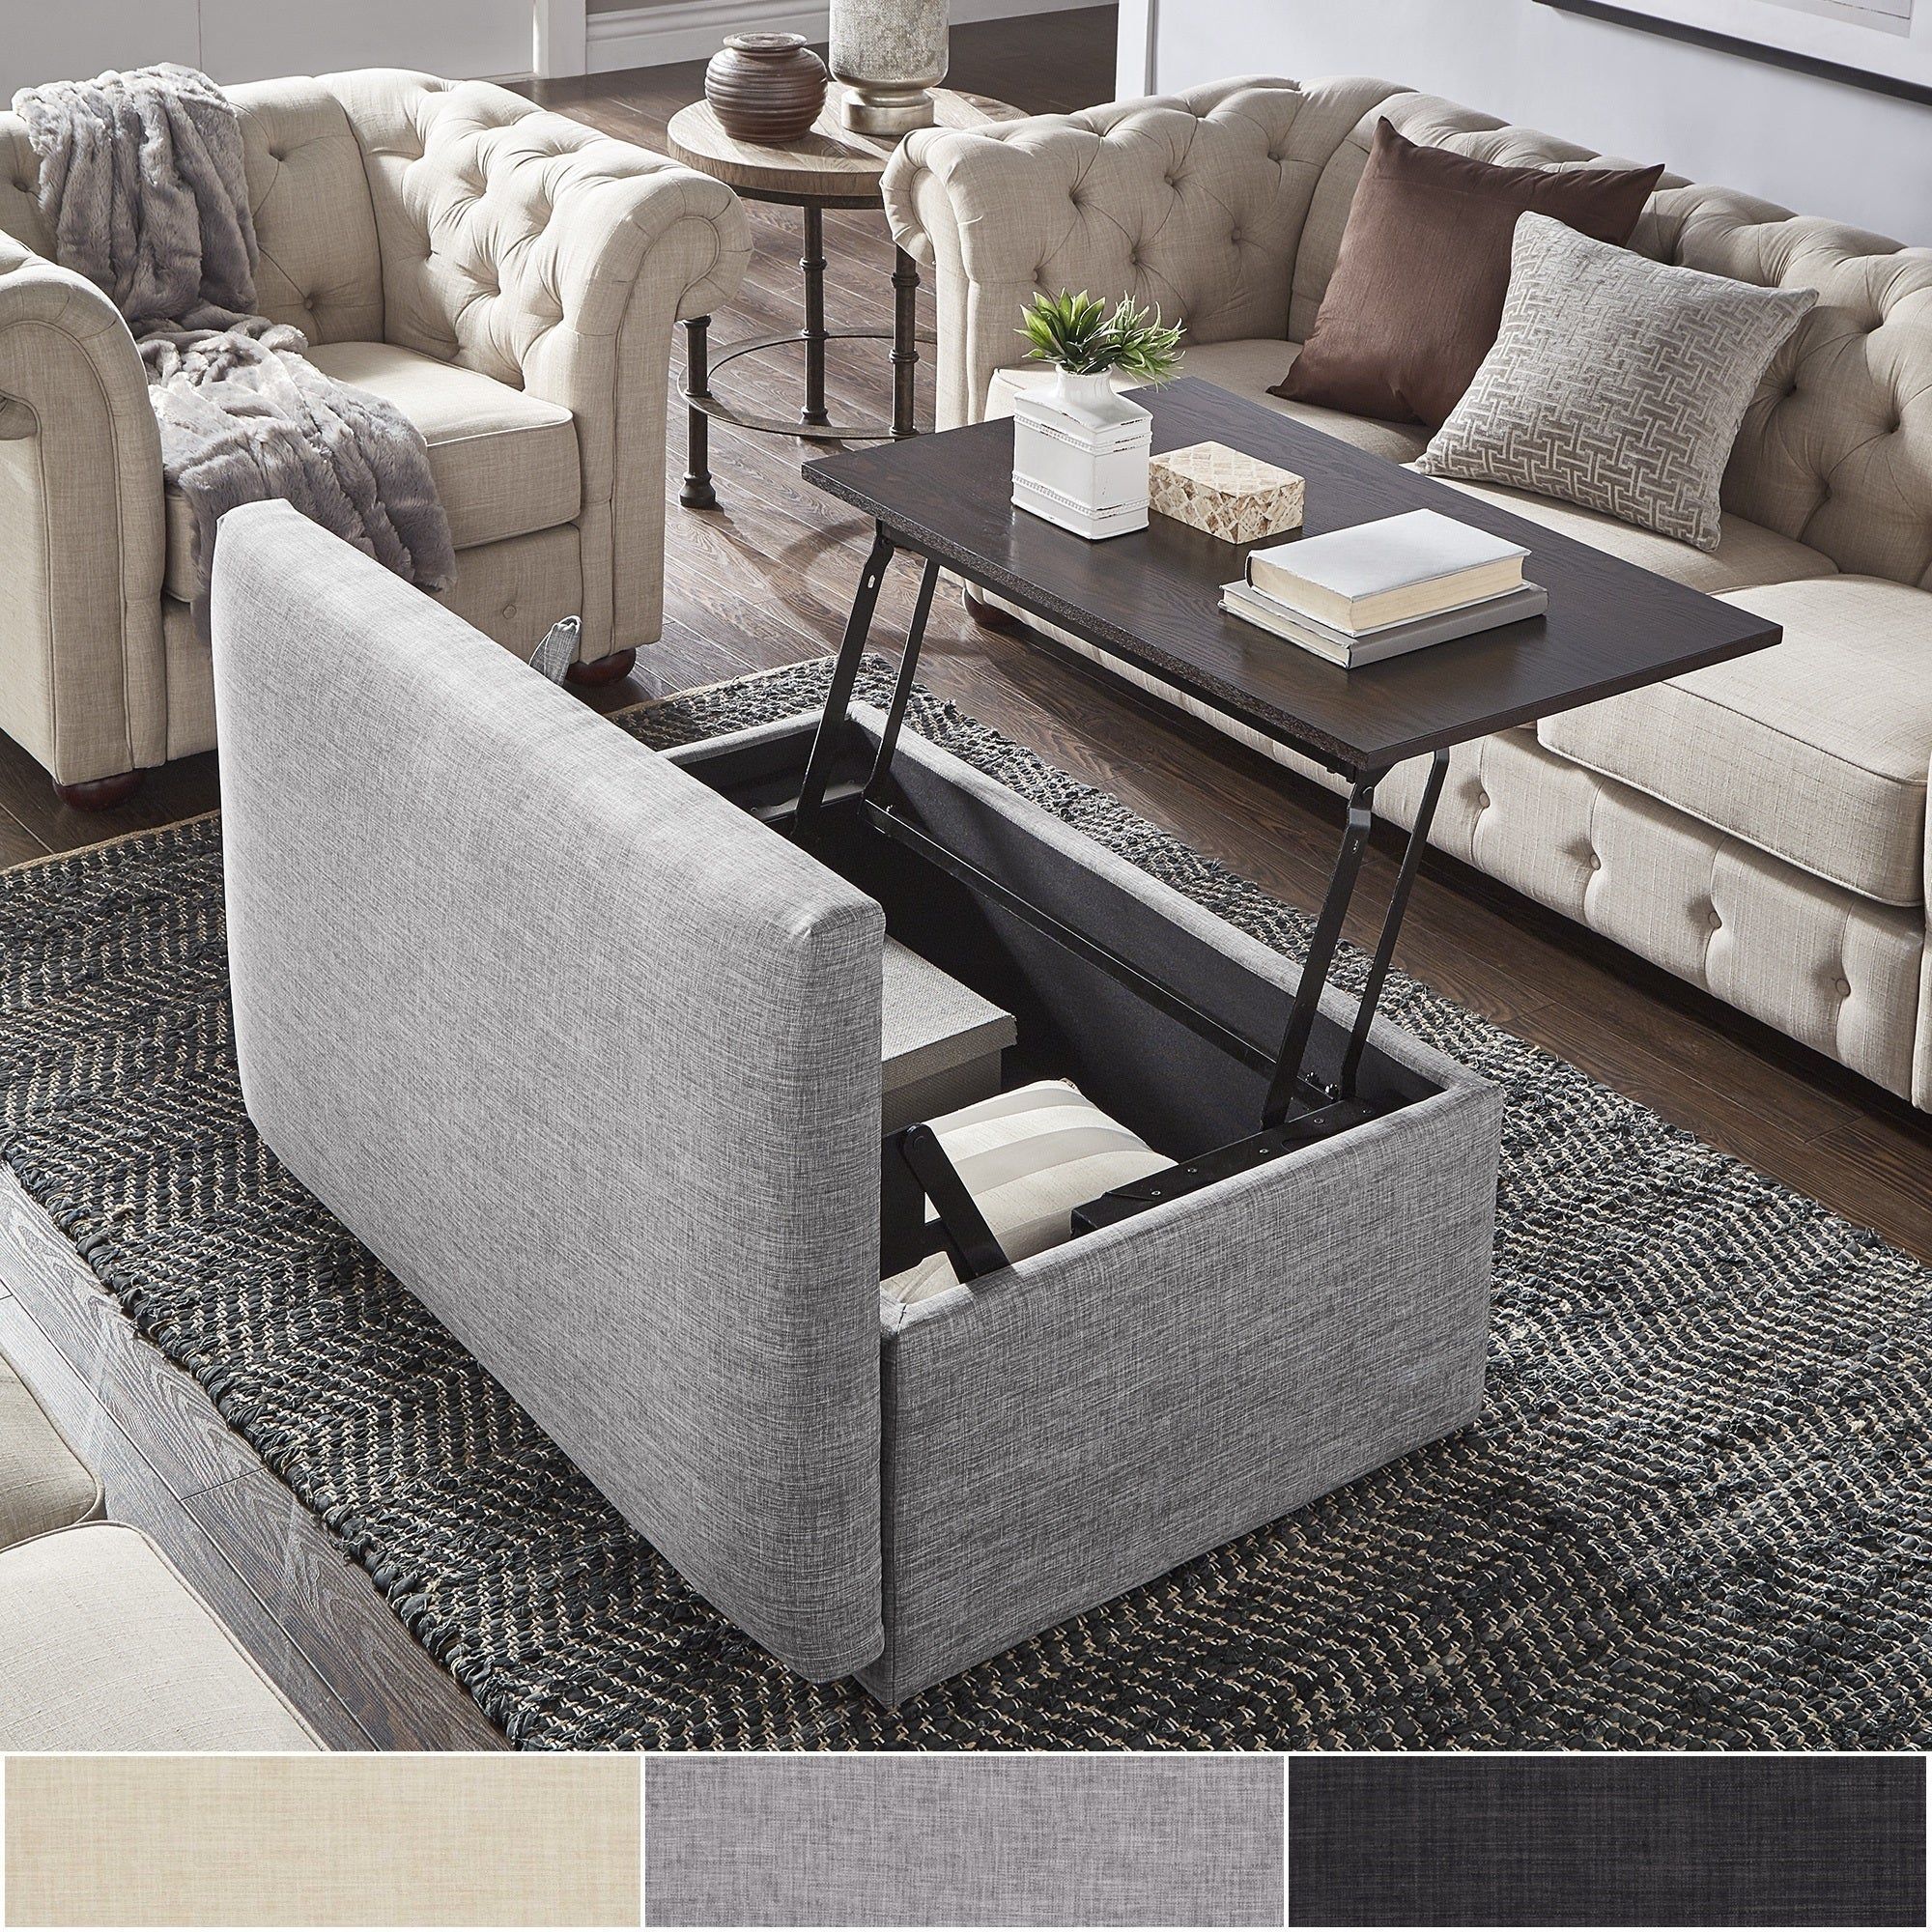 Landen Lift Top Upholstered Storage Ottoman Coffee Table ...